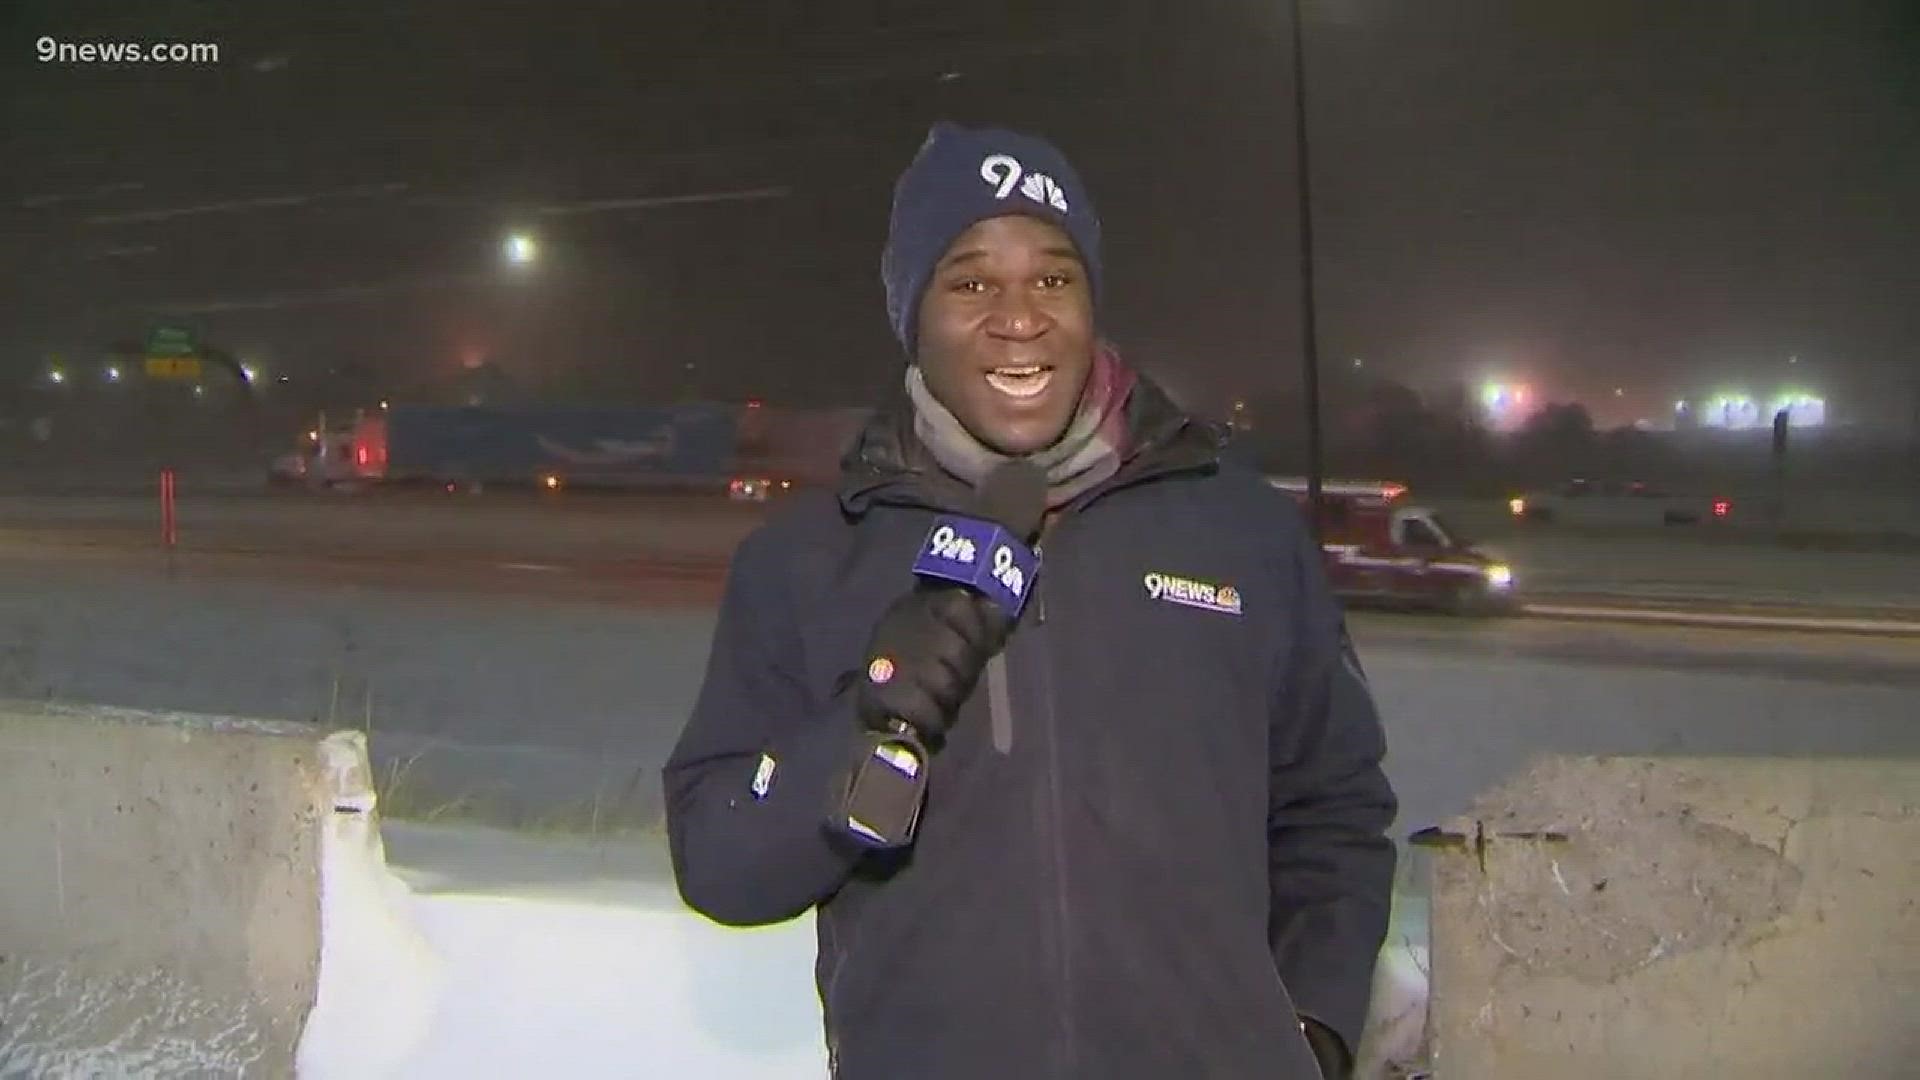 9NEWS reporter Eddie Randle is in Monument with a look at current conditions there. There's a lot of blowing snow which is causing limited visibility.